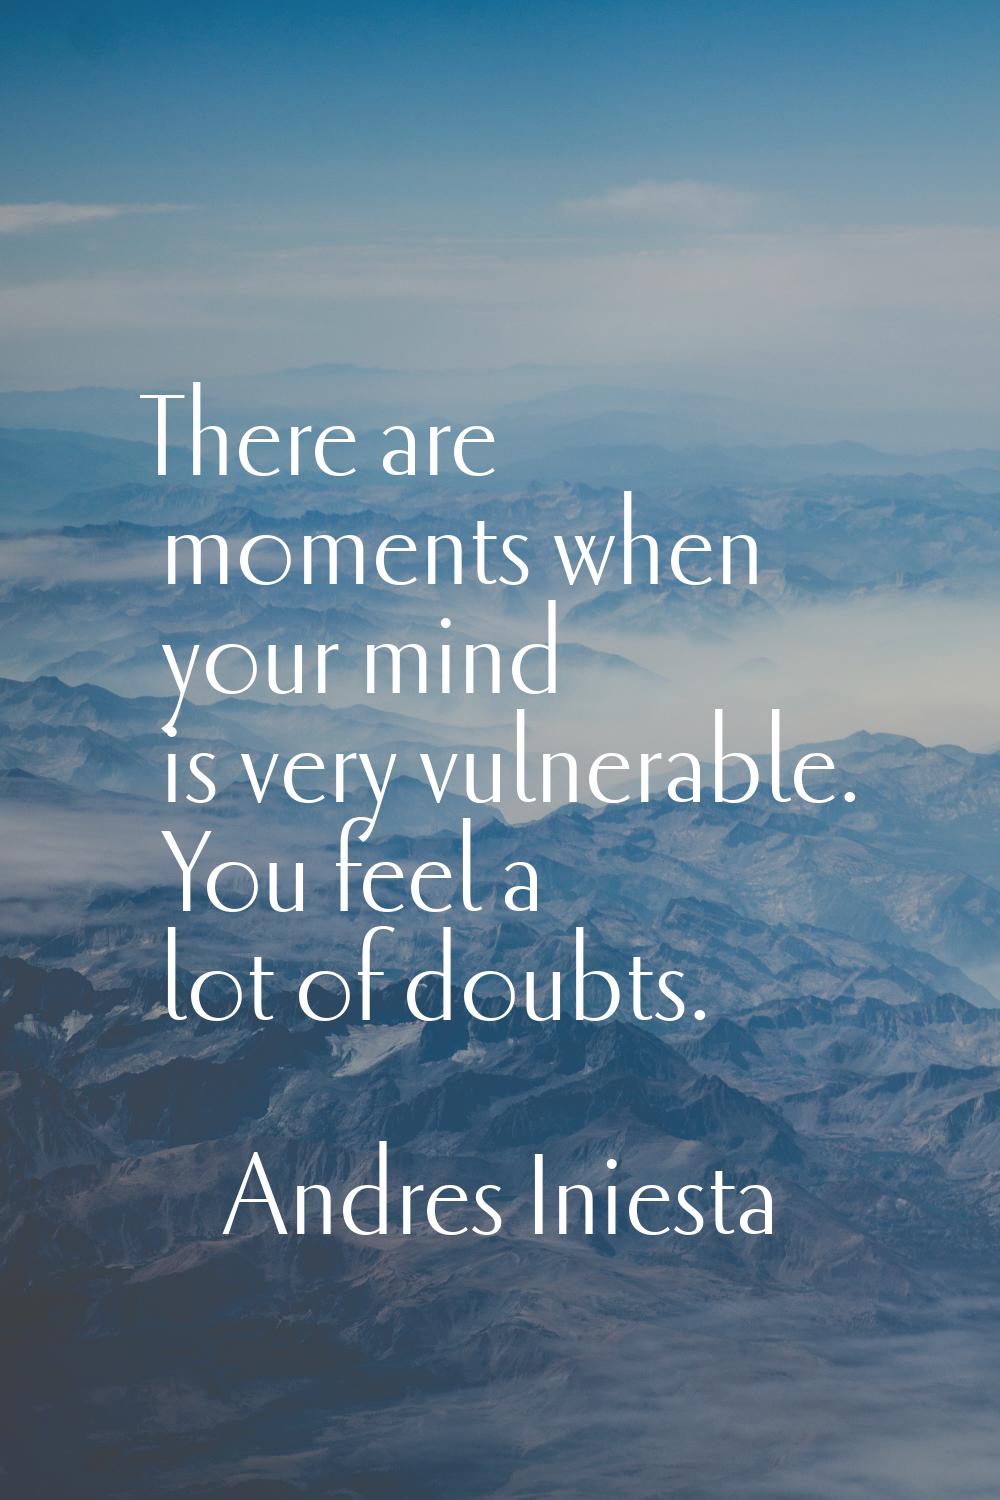 There are moments when your mind is very vulnerable. You feel a lot of doubts.